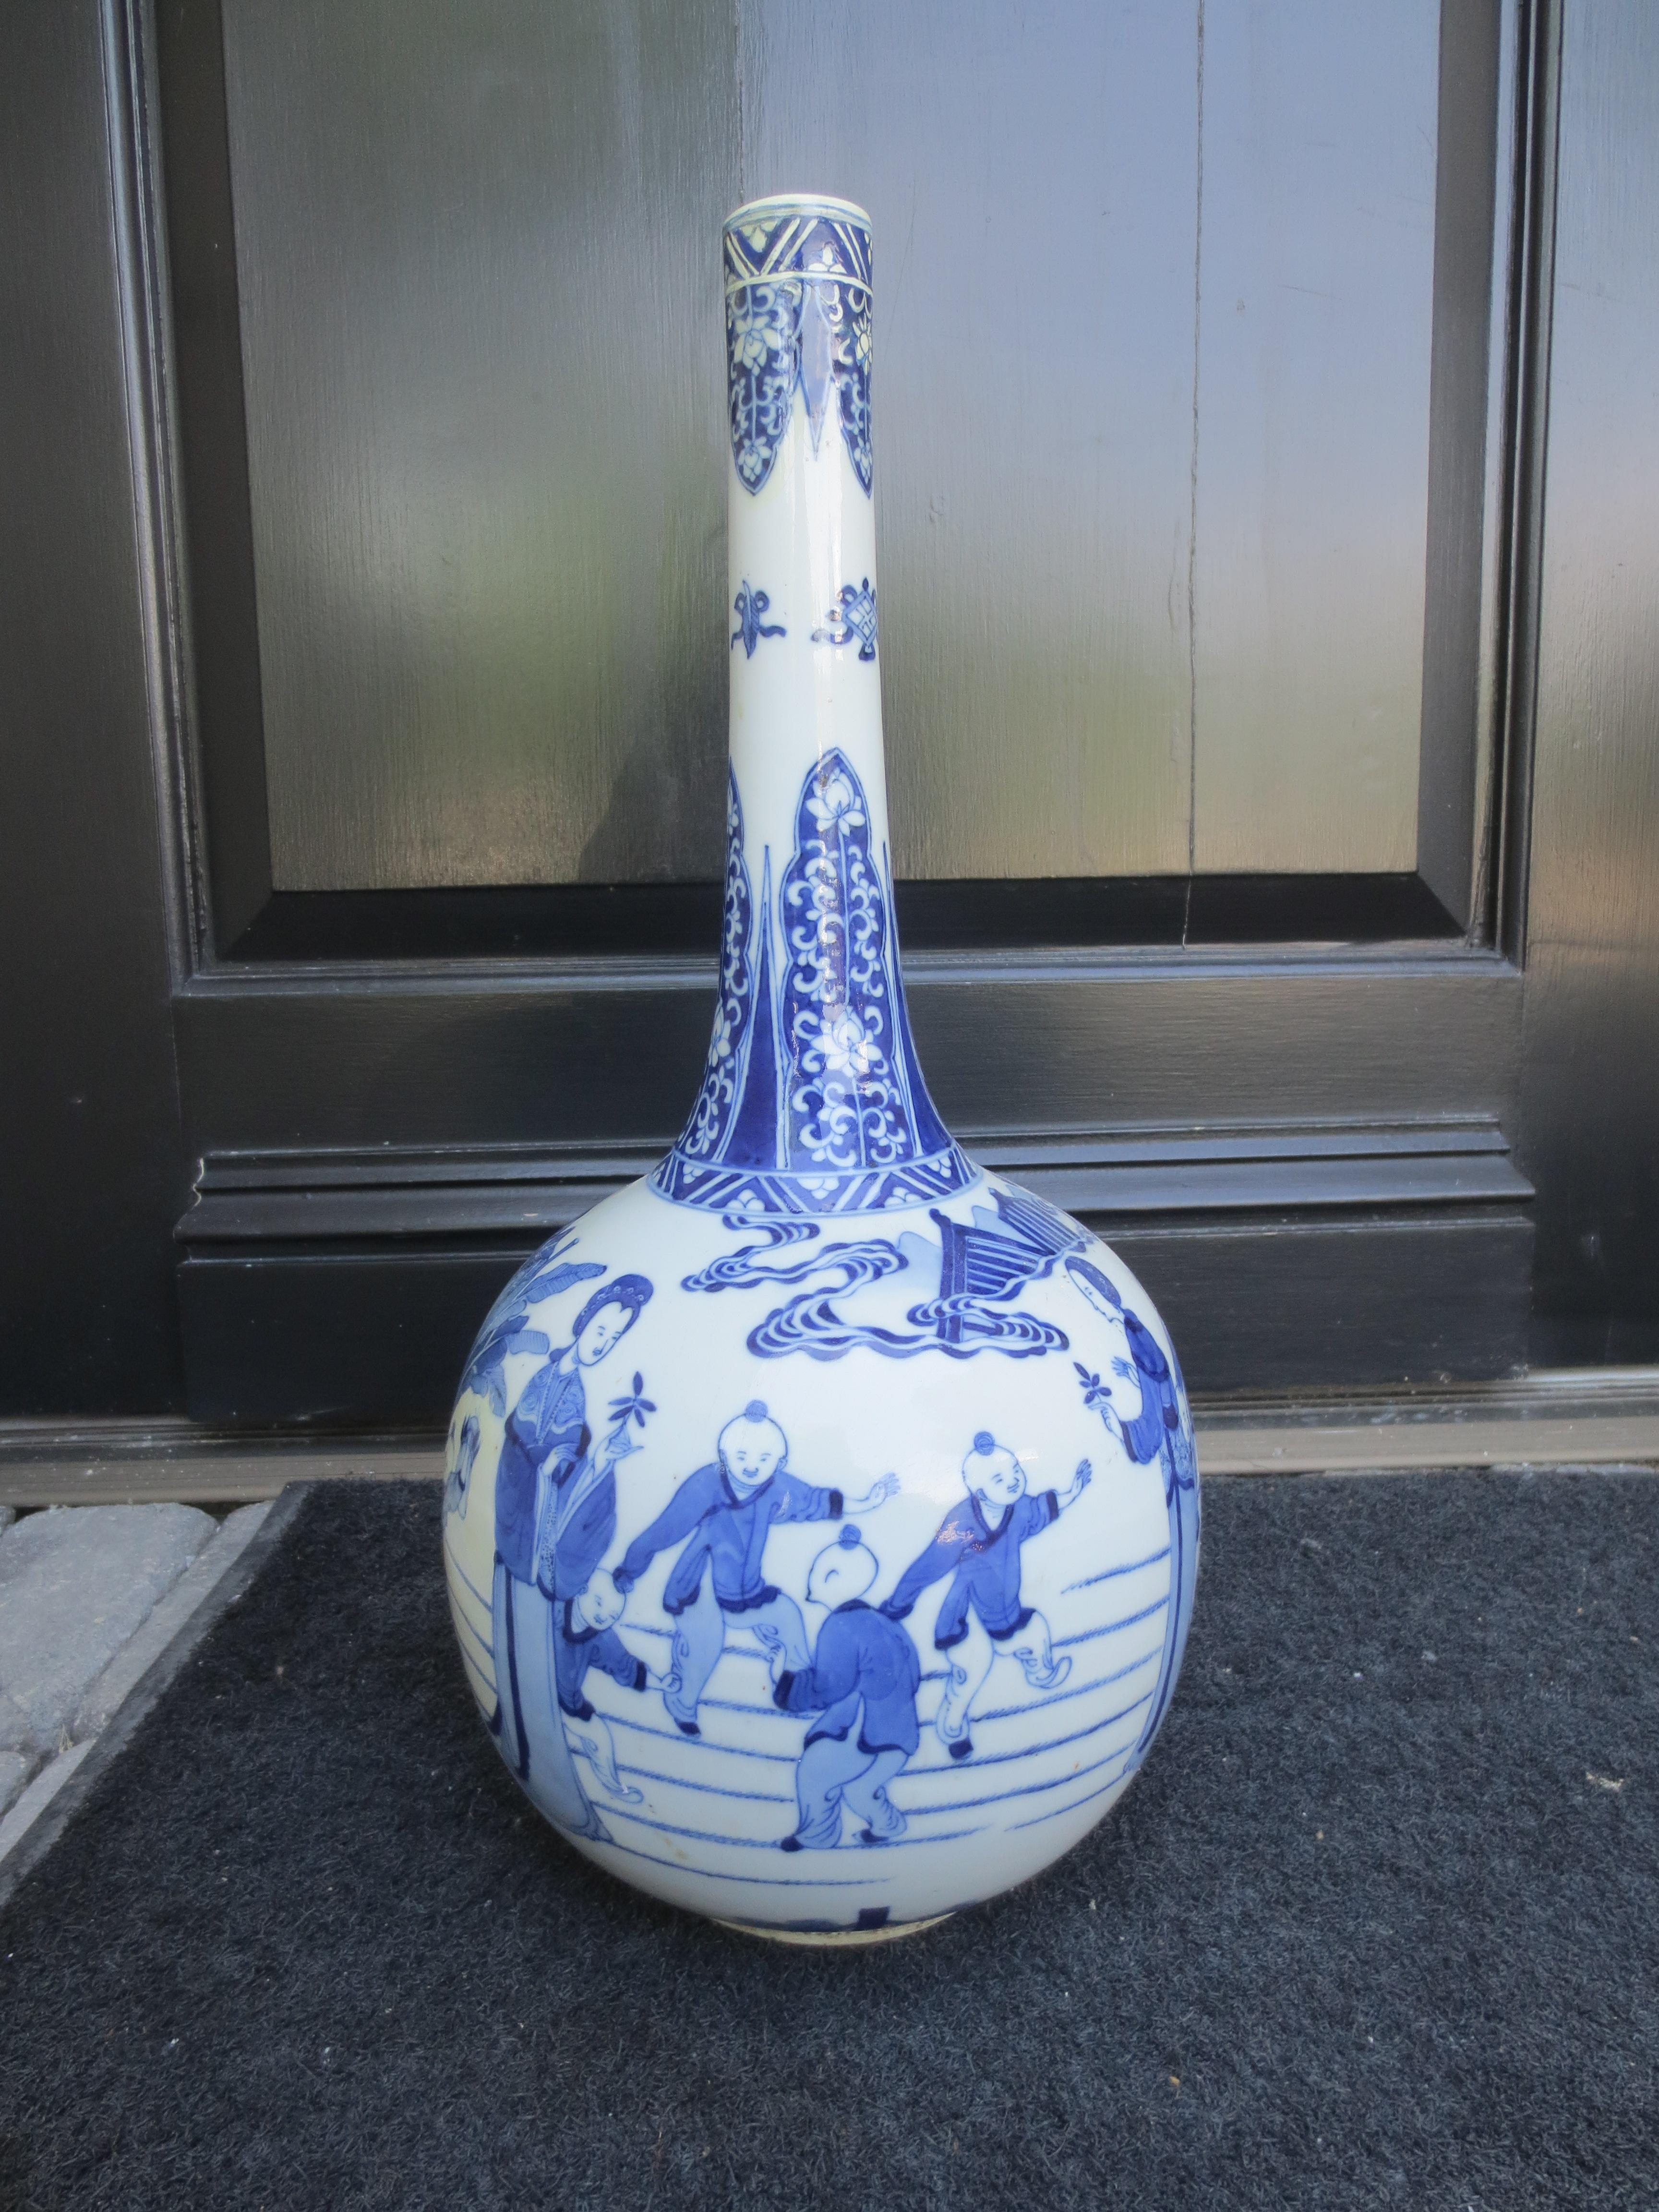 18th Century Chinese blue and white vase
8